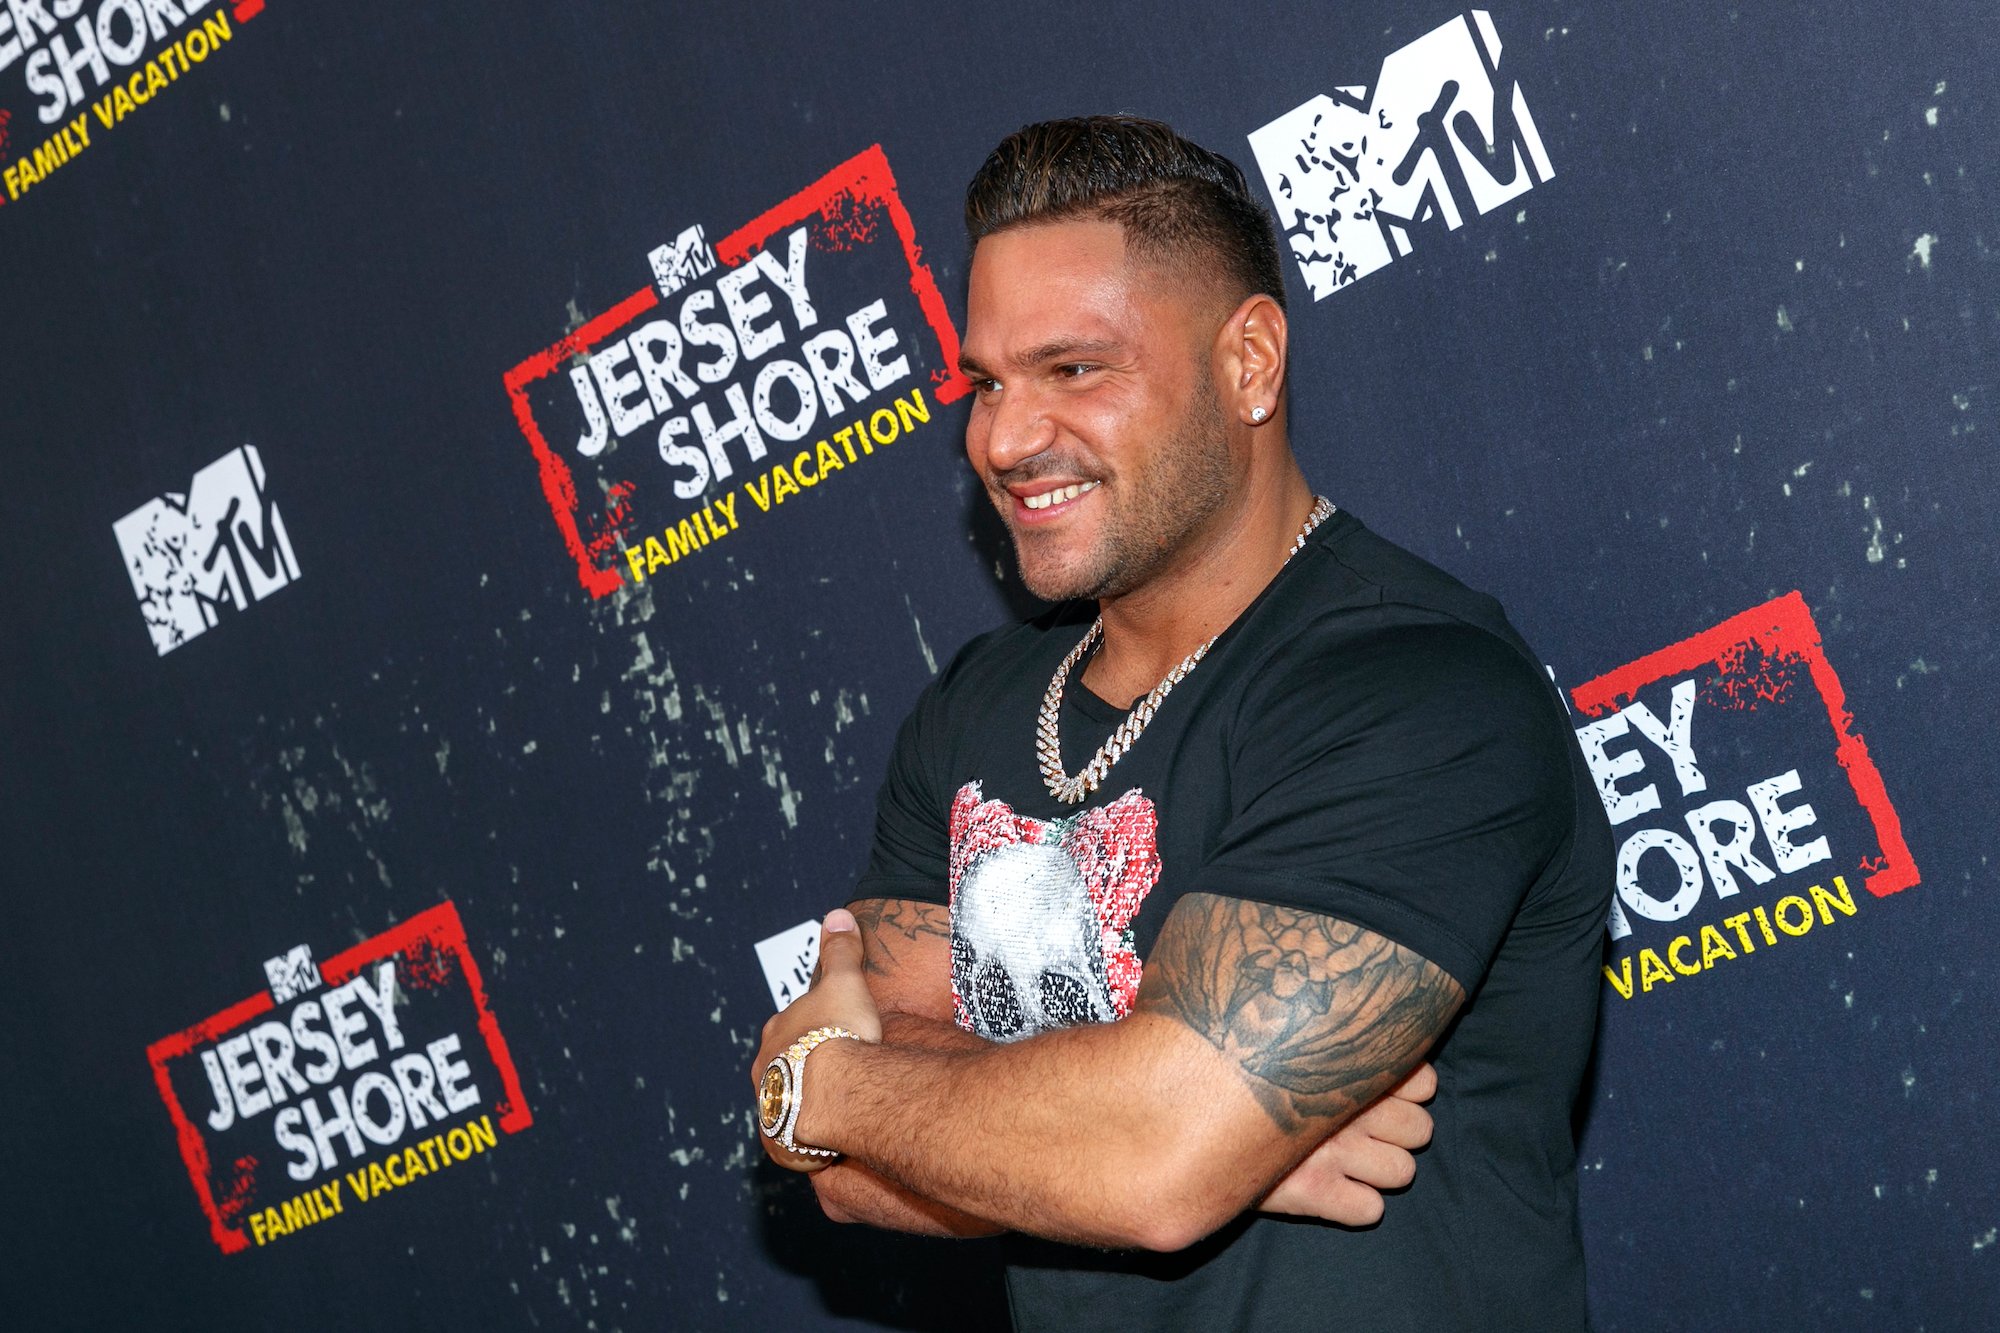 ‘Jersey Shore’: Ronnie Ortiz-Magro Earns an Estimated $14,000 for His Clickbait